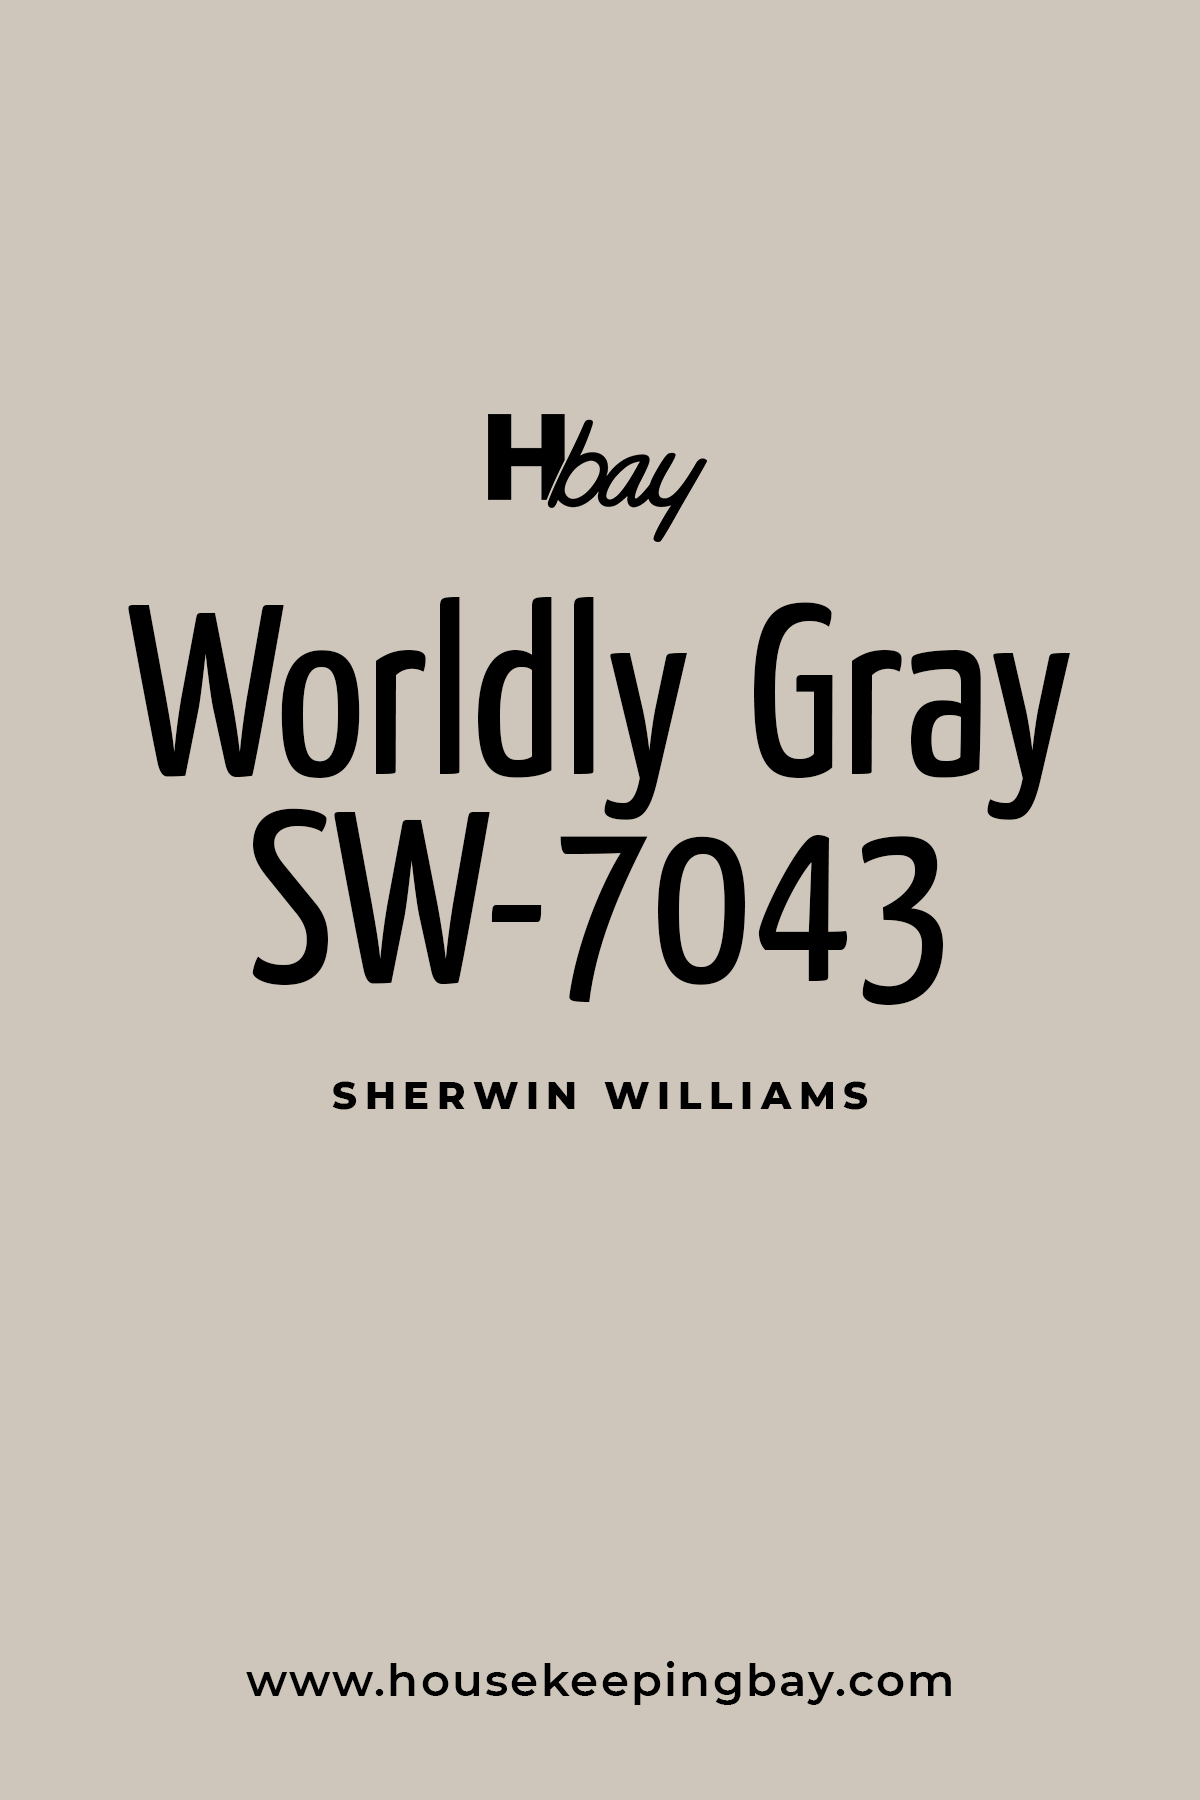 Worldly Gray SW 7043 By Sherwin Williams (1)